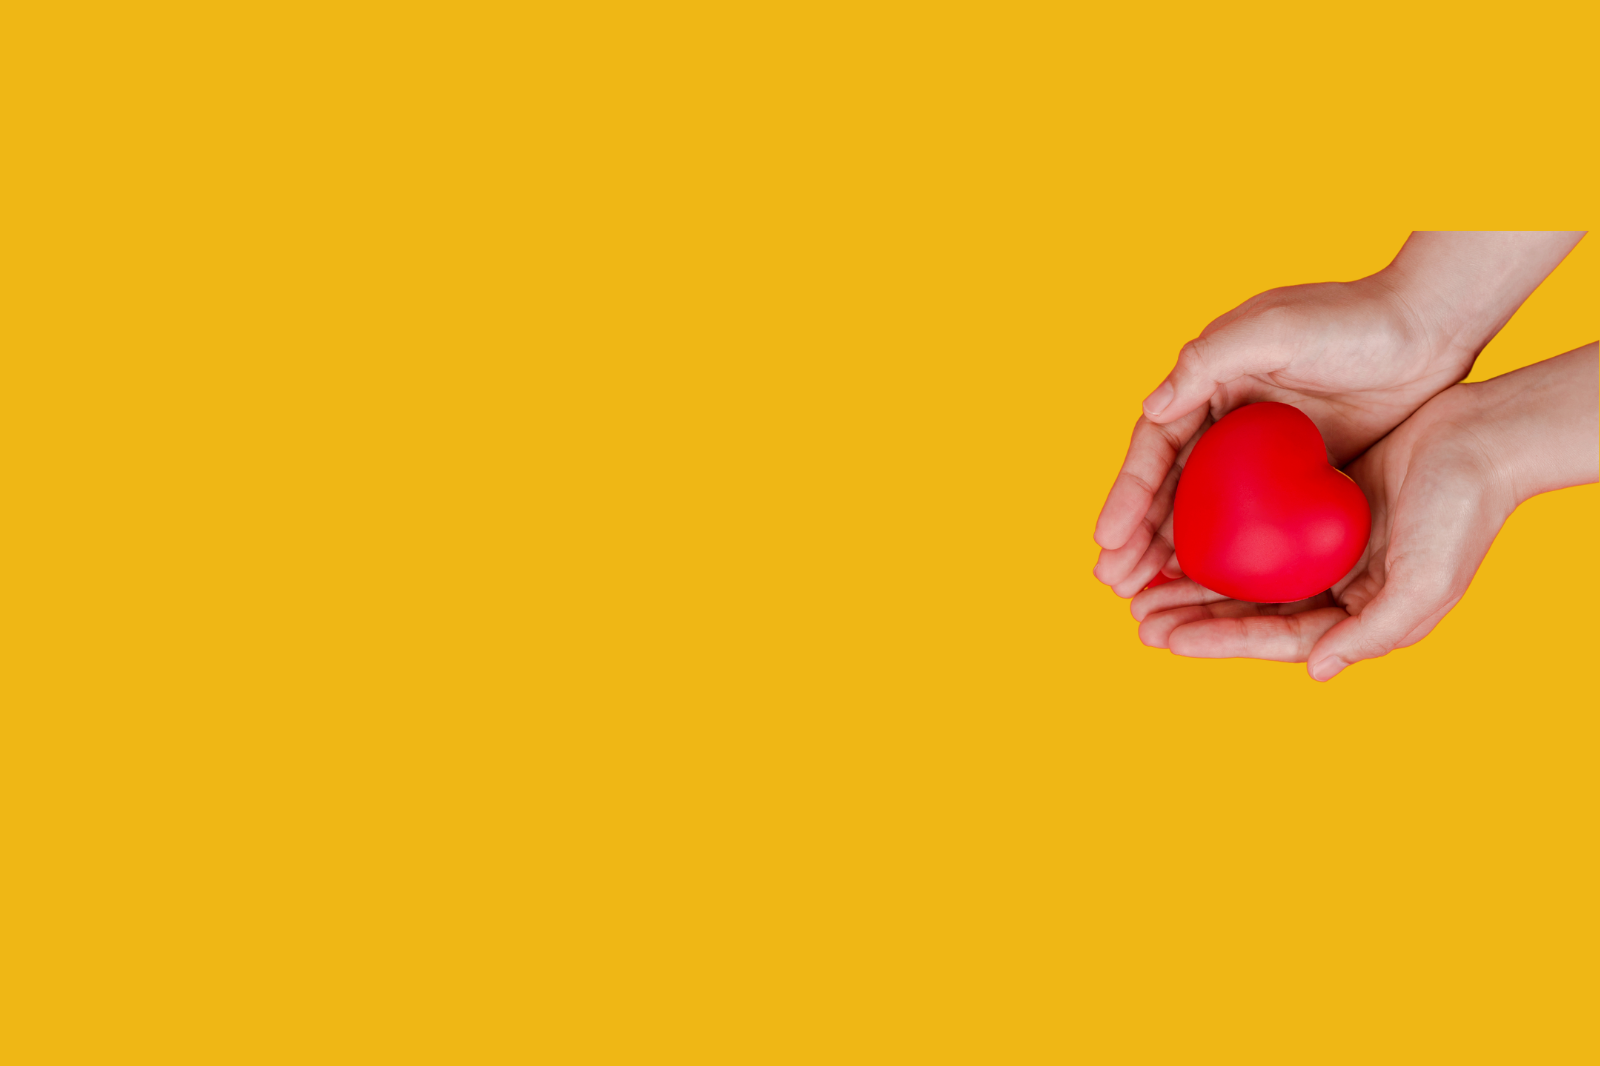 Two hands holding a red heart on a yellow background for a charity specialist.